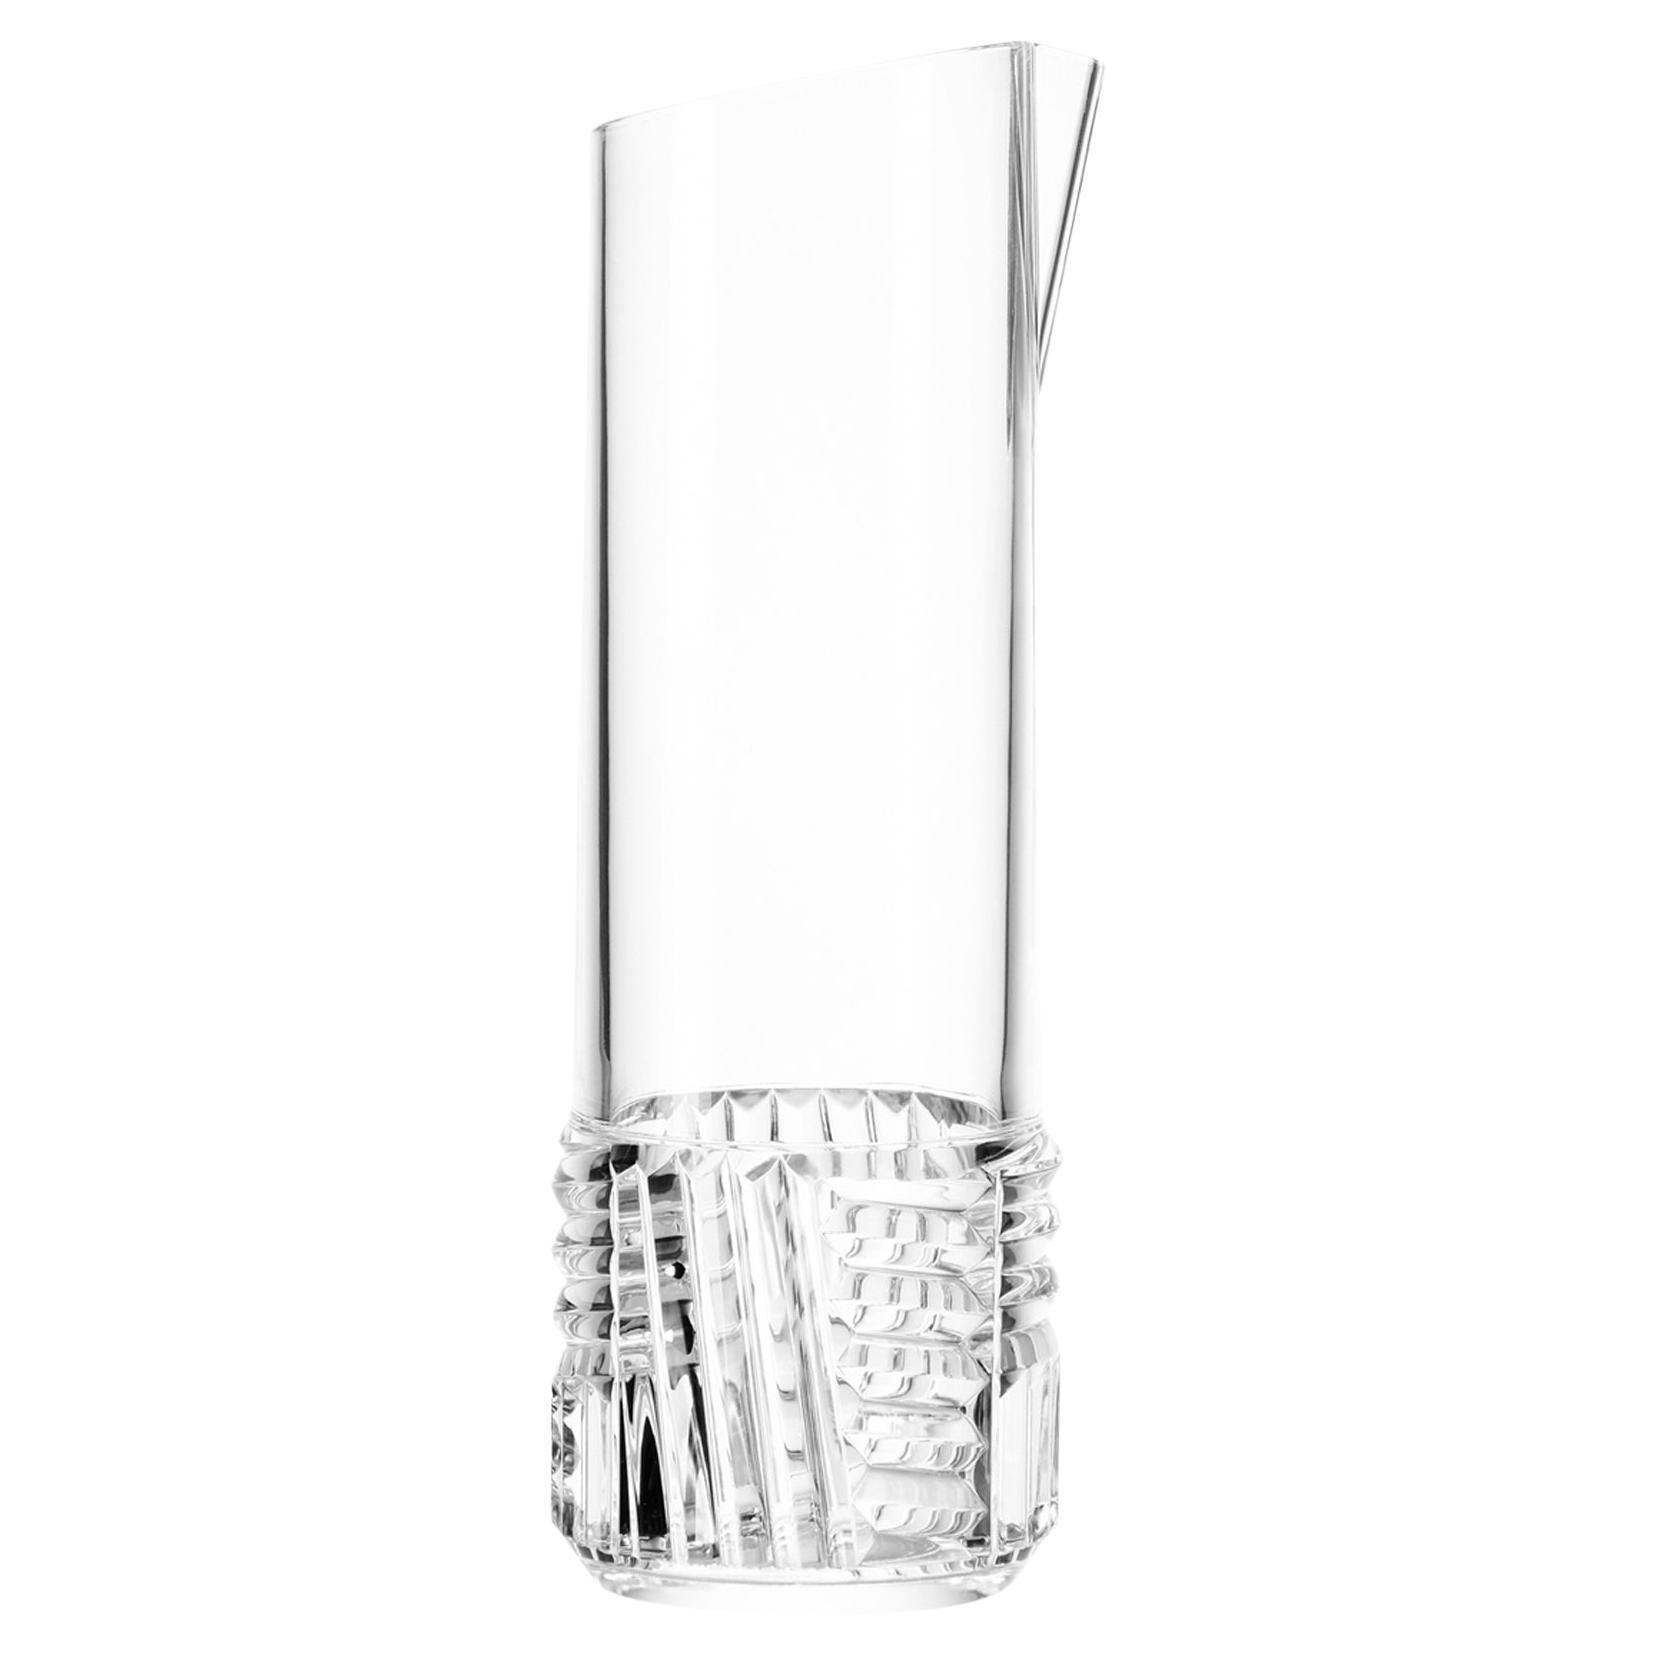 Kartell Trama Carafe in Crystal by Patricia Urquiola